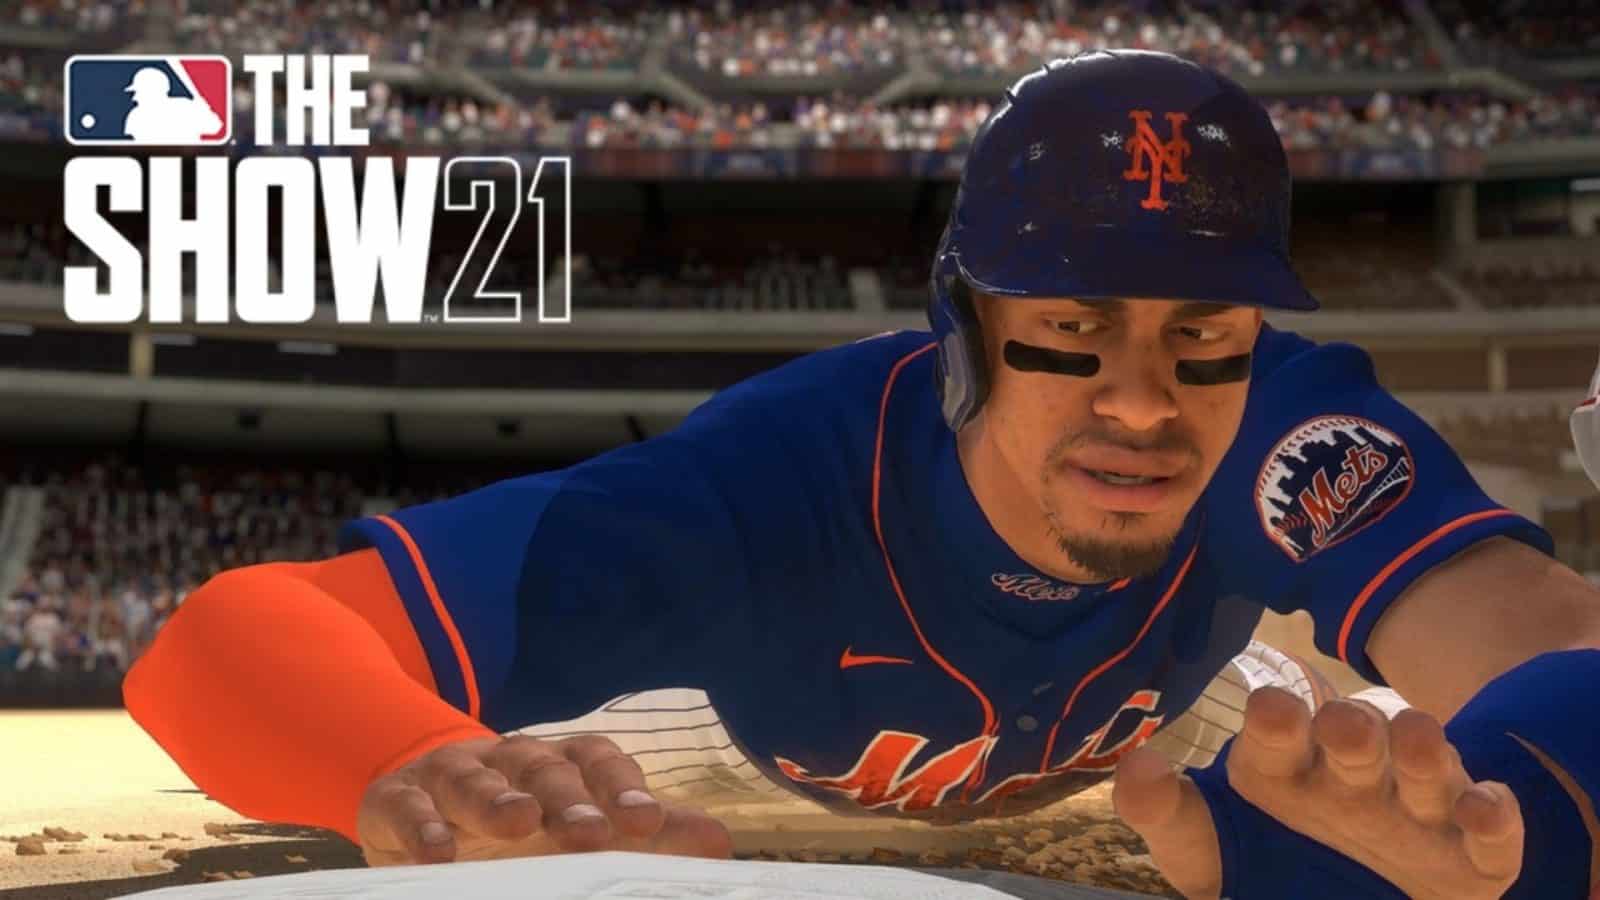 MLB The Show 21 Best free agents to sign in Franchise